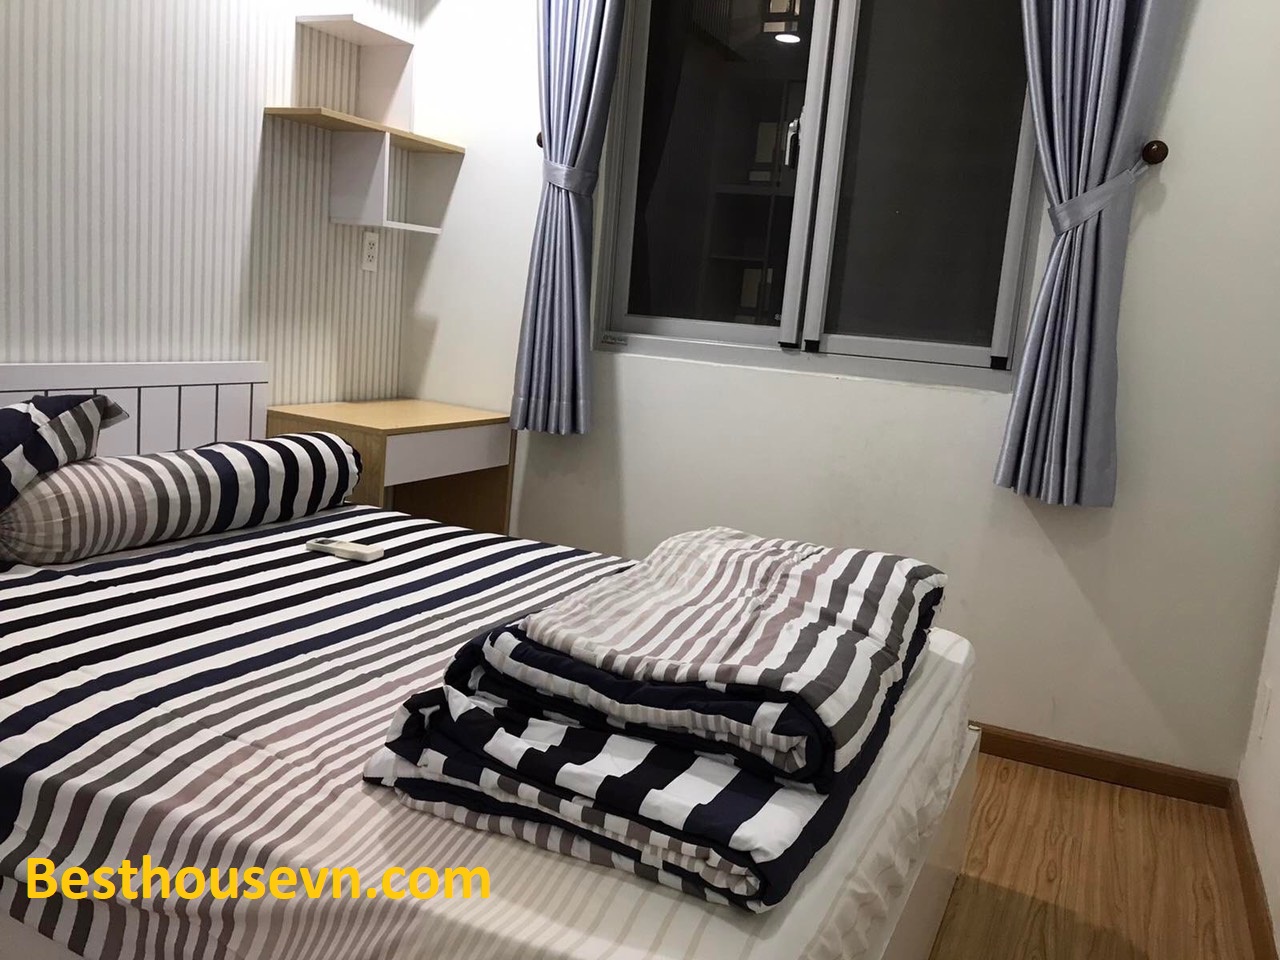 Scenic-valley-apartment-for rent-in-phu-my-hung-district 7-hcmc